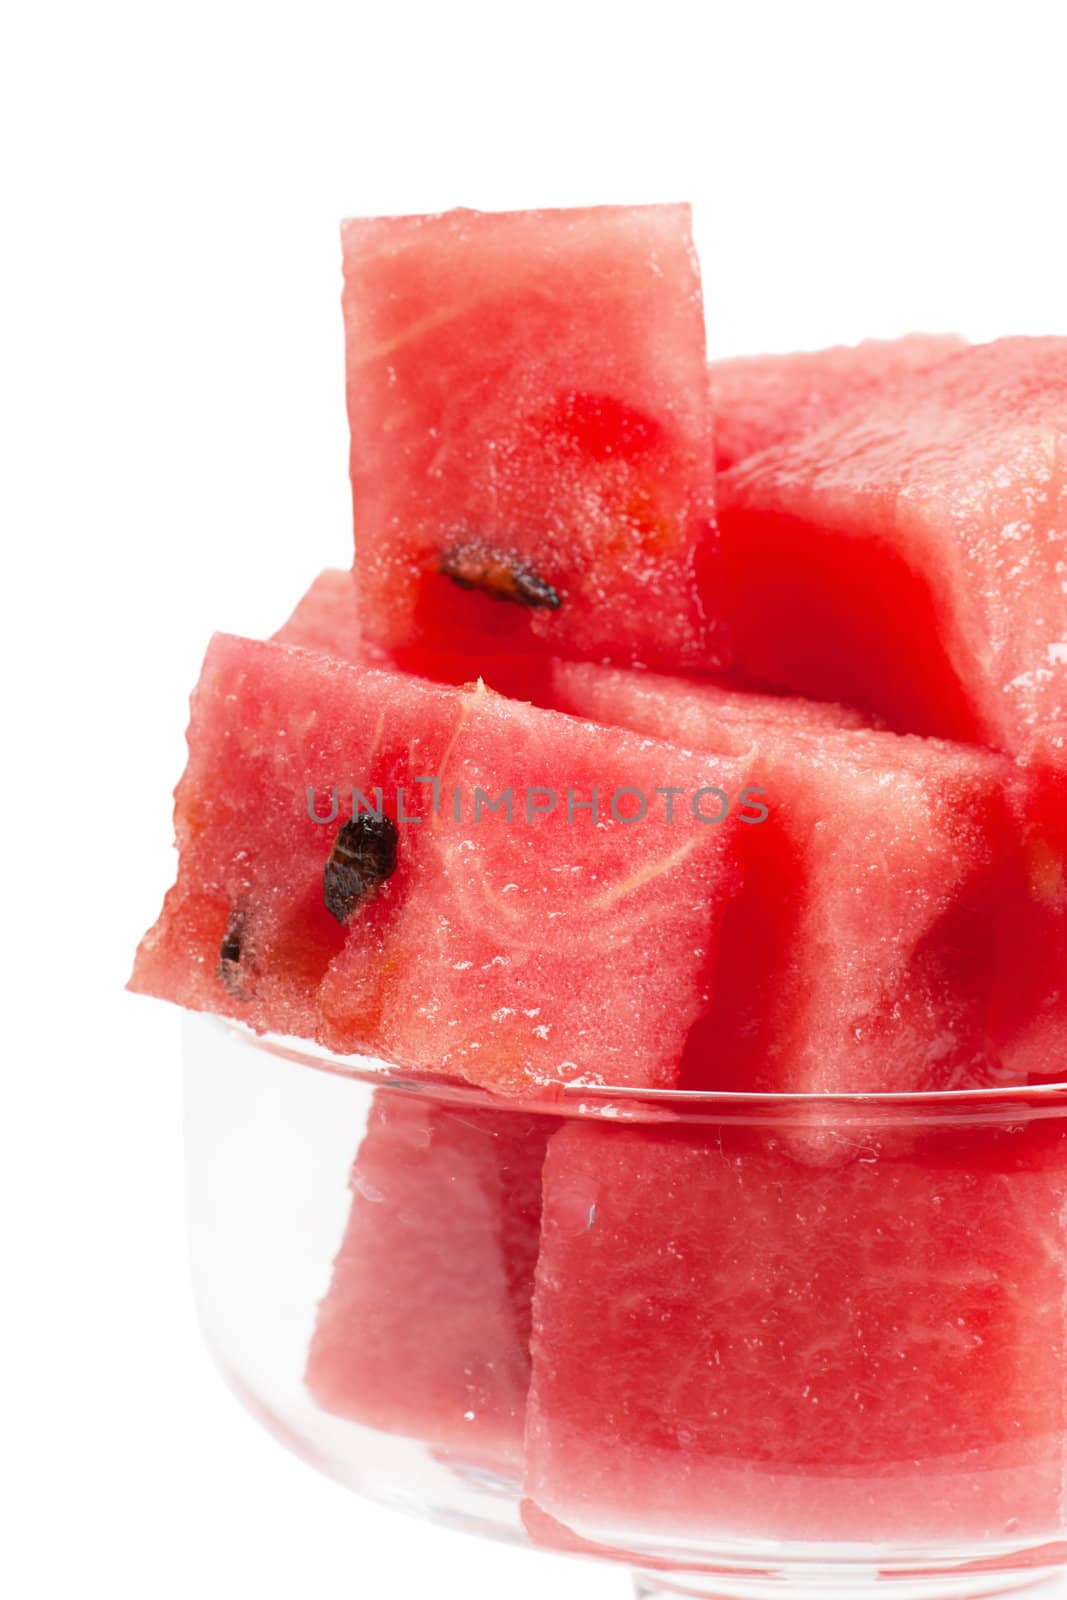 Watermelon cubes by AGorohov